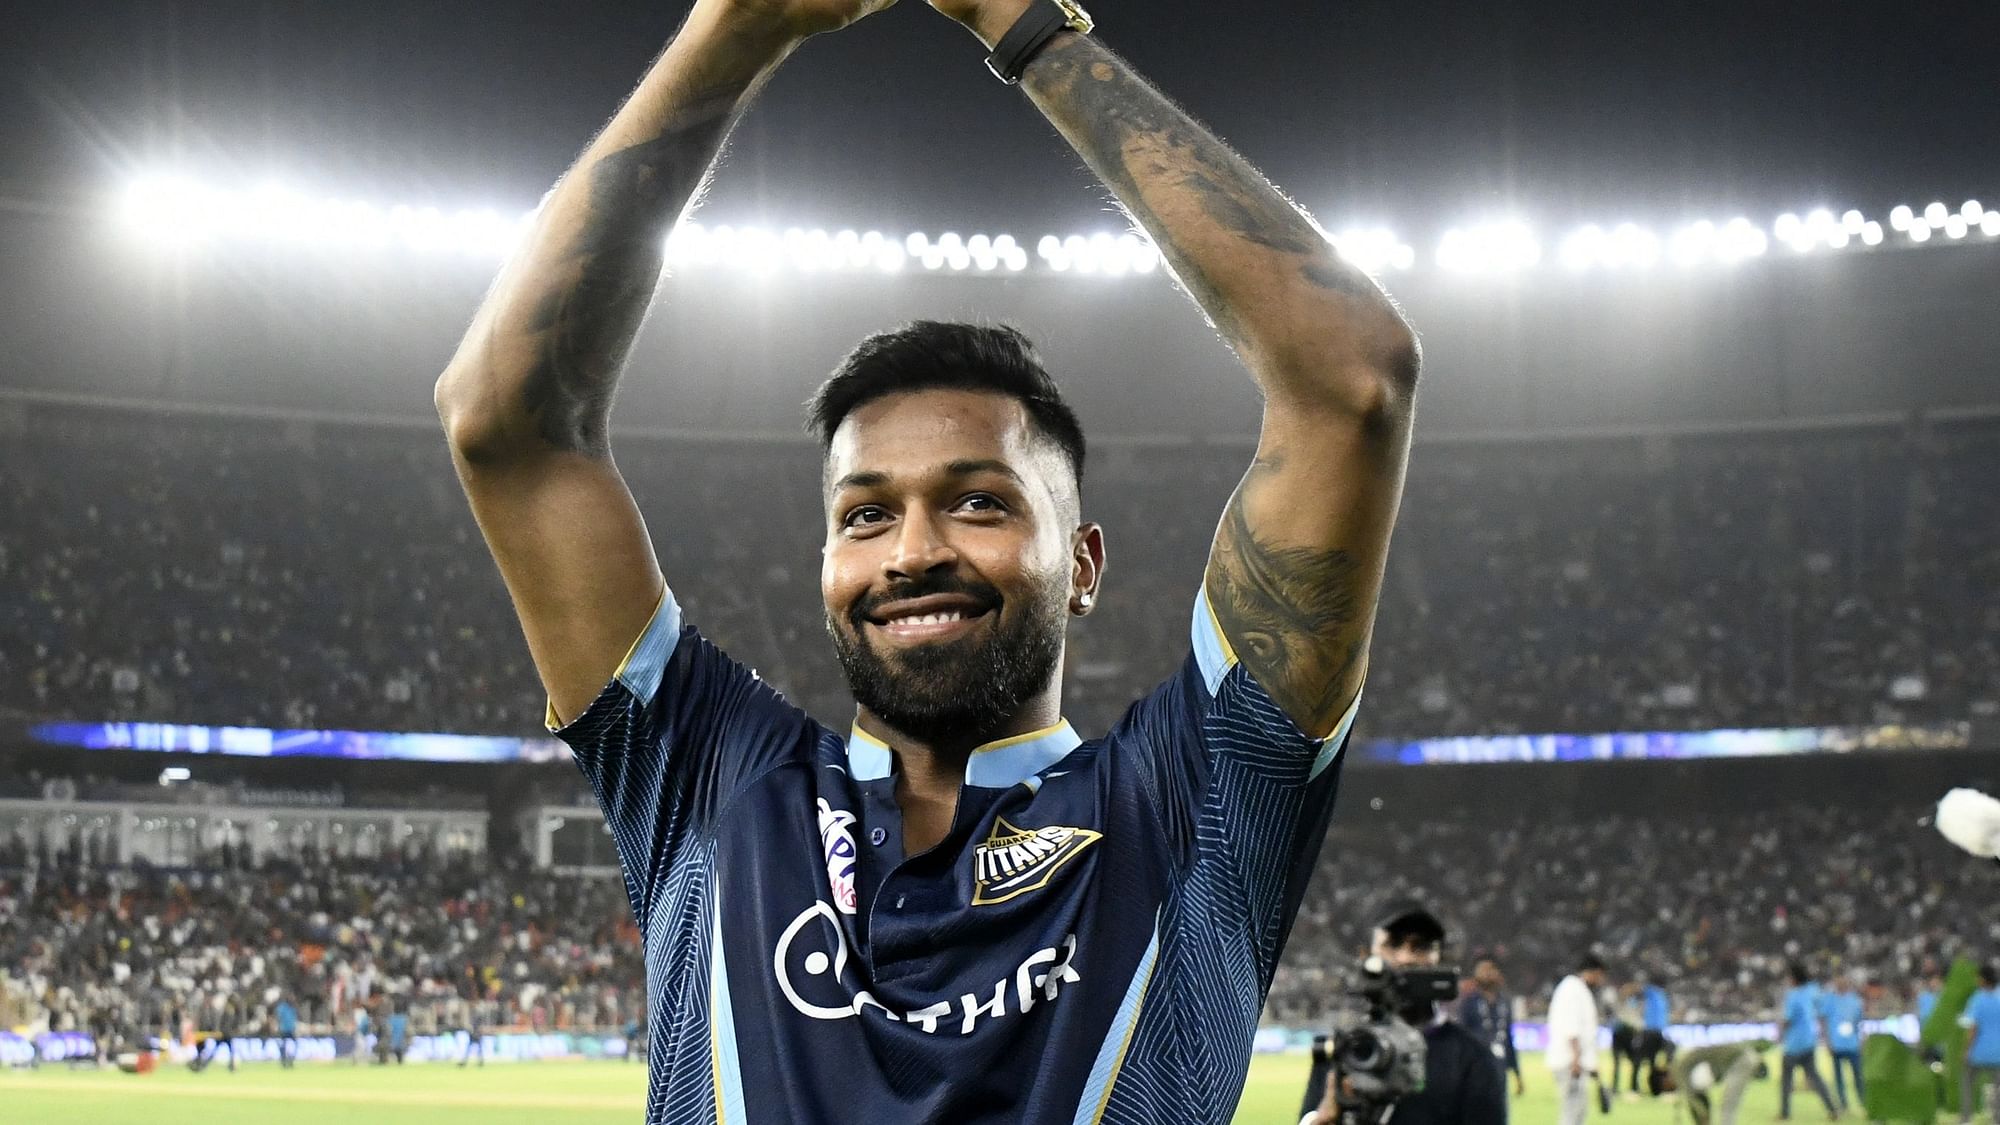 Wanted to Show at the Right Time What I Worked For: Hardik Pandya Says After Winning IPL 2022